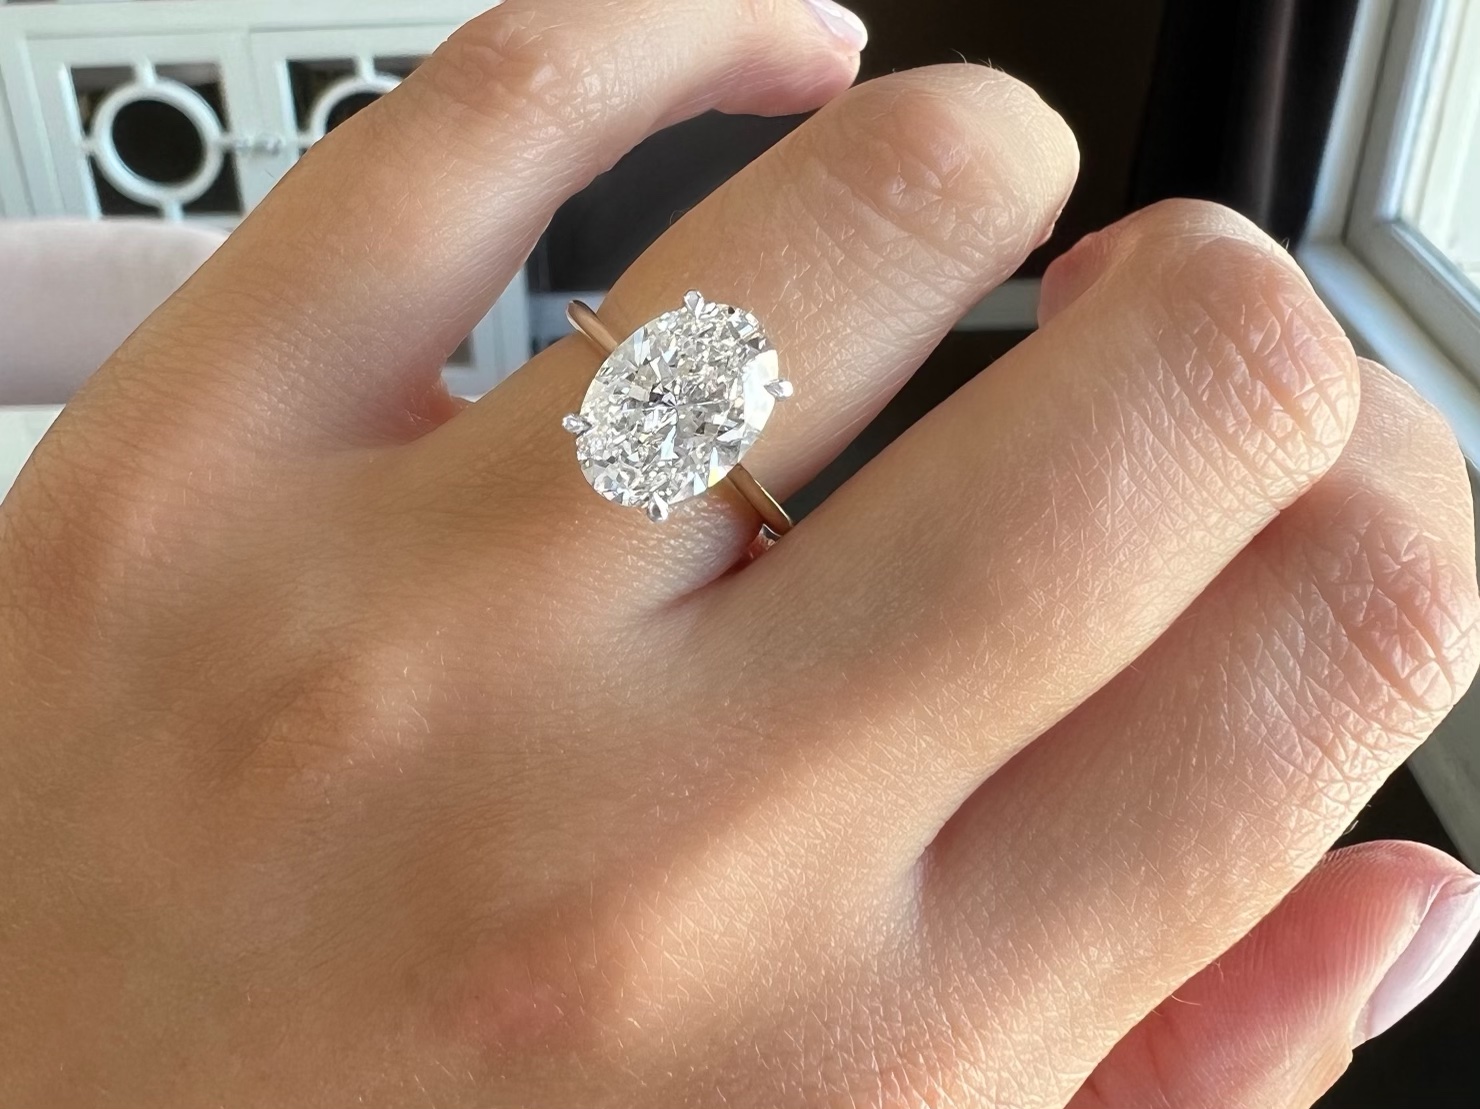 Meet The Most Popular Engagement Ring On Pinterest